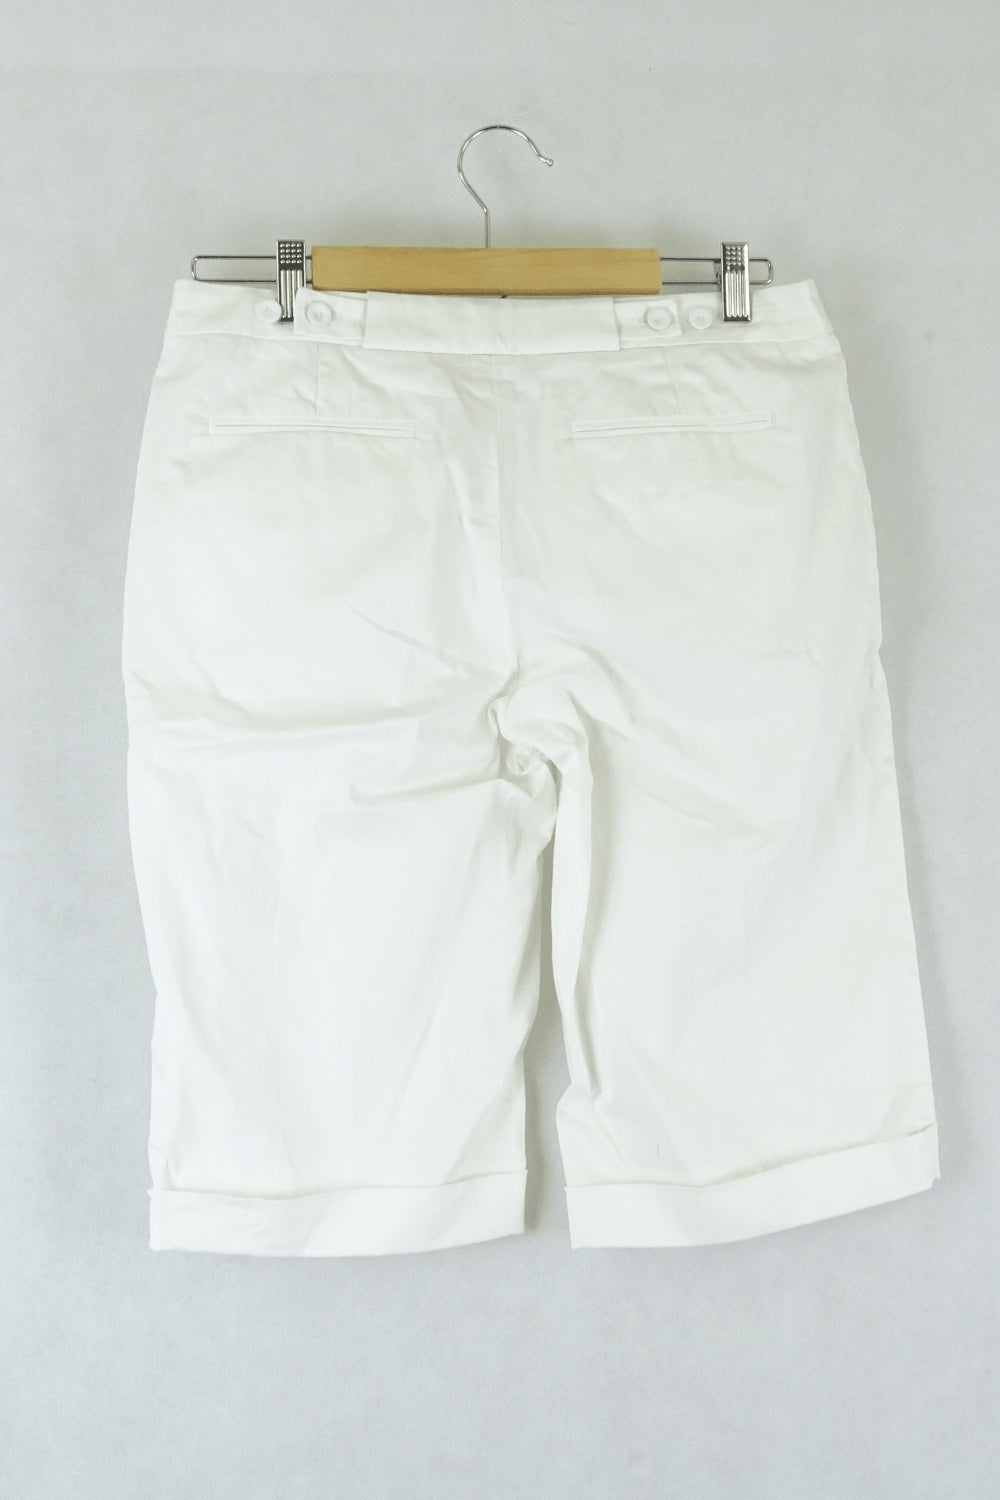 Country Road White Shorts 10